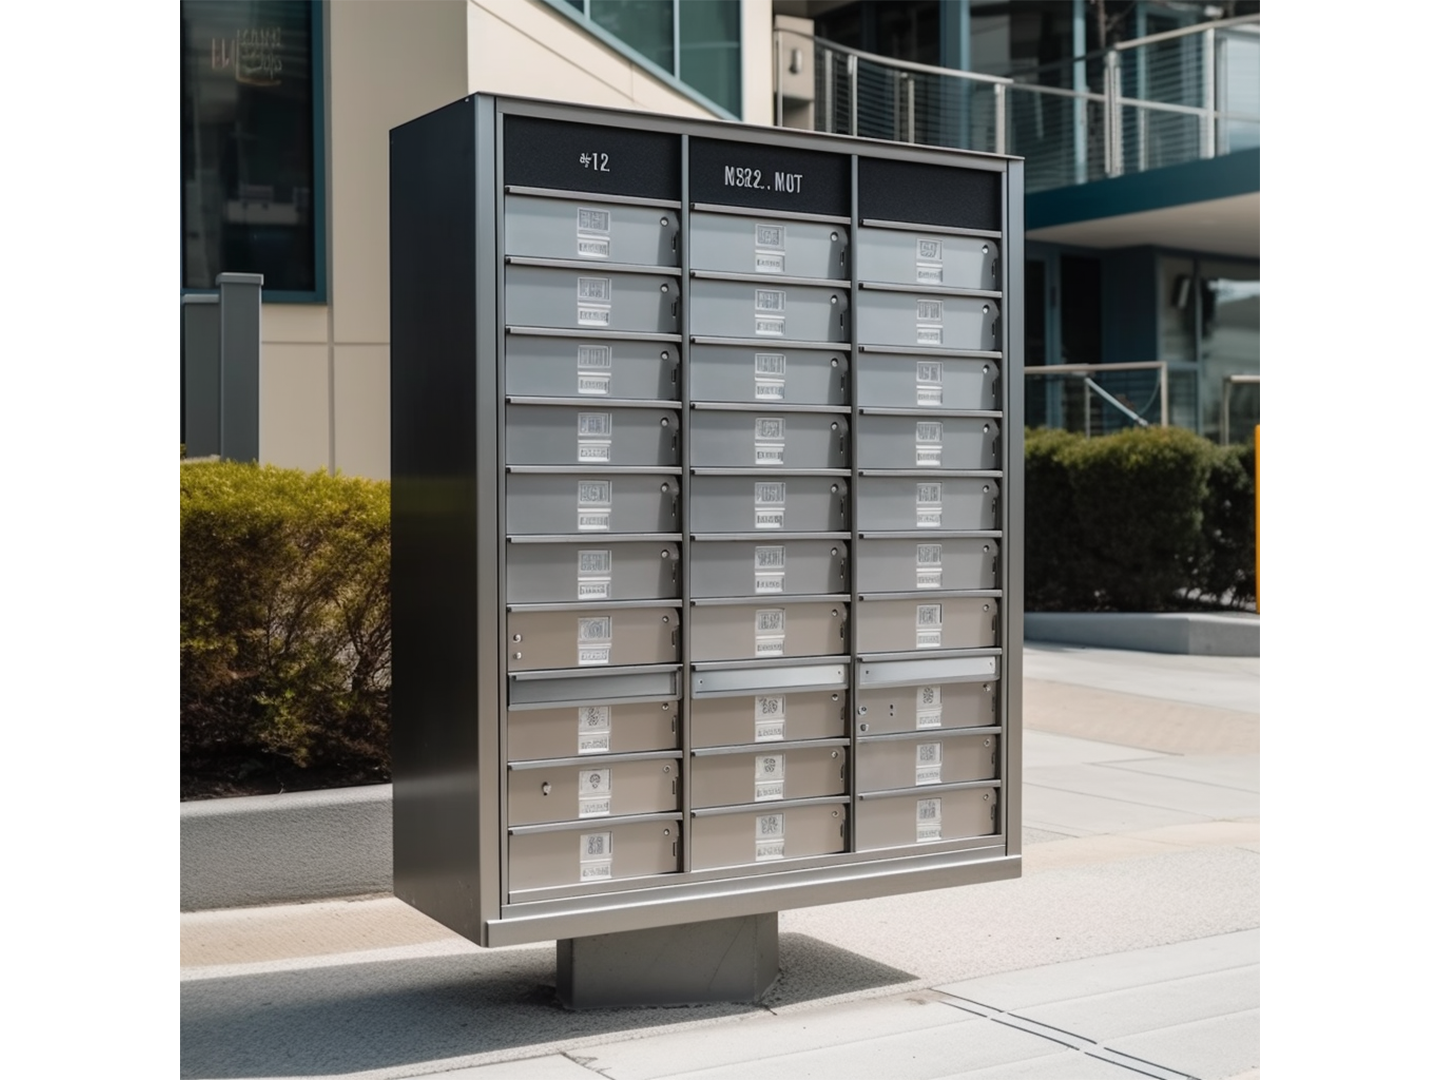 Community Mailbox - Outdoor Mailbox - Outdoor Mailbox for Apartments